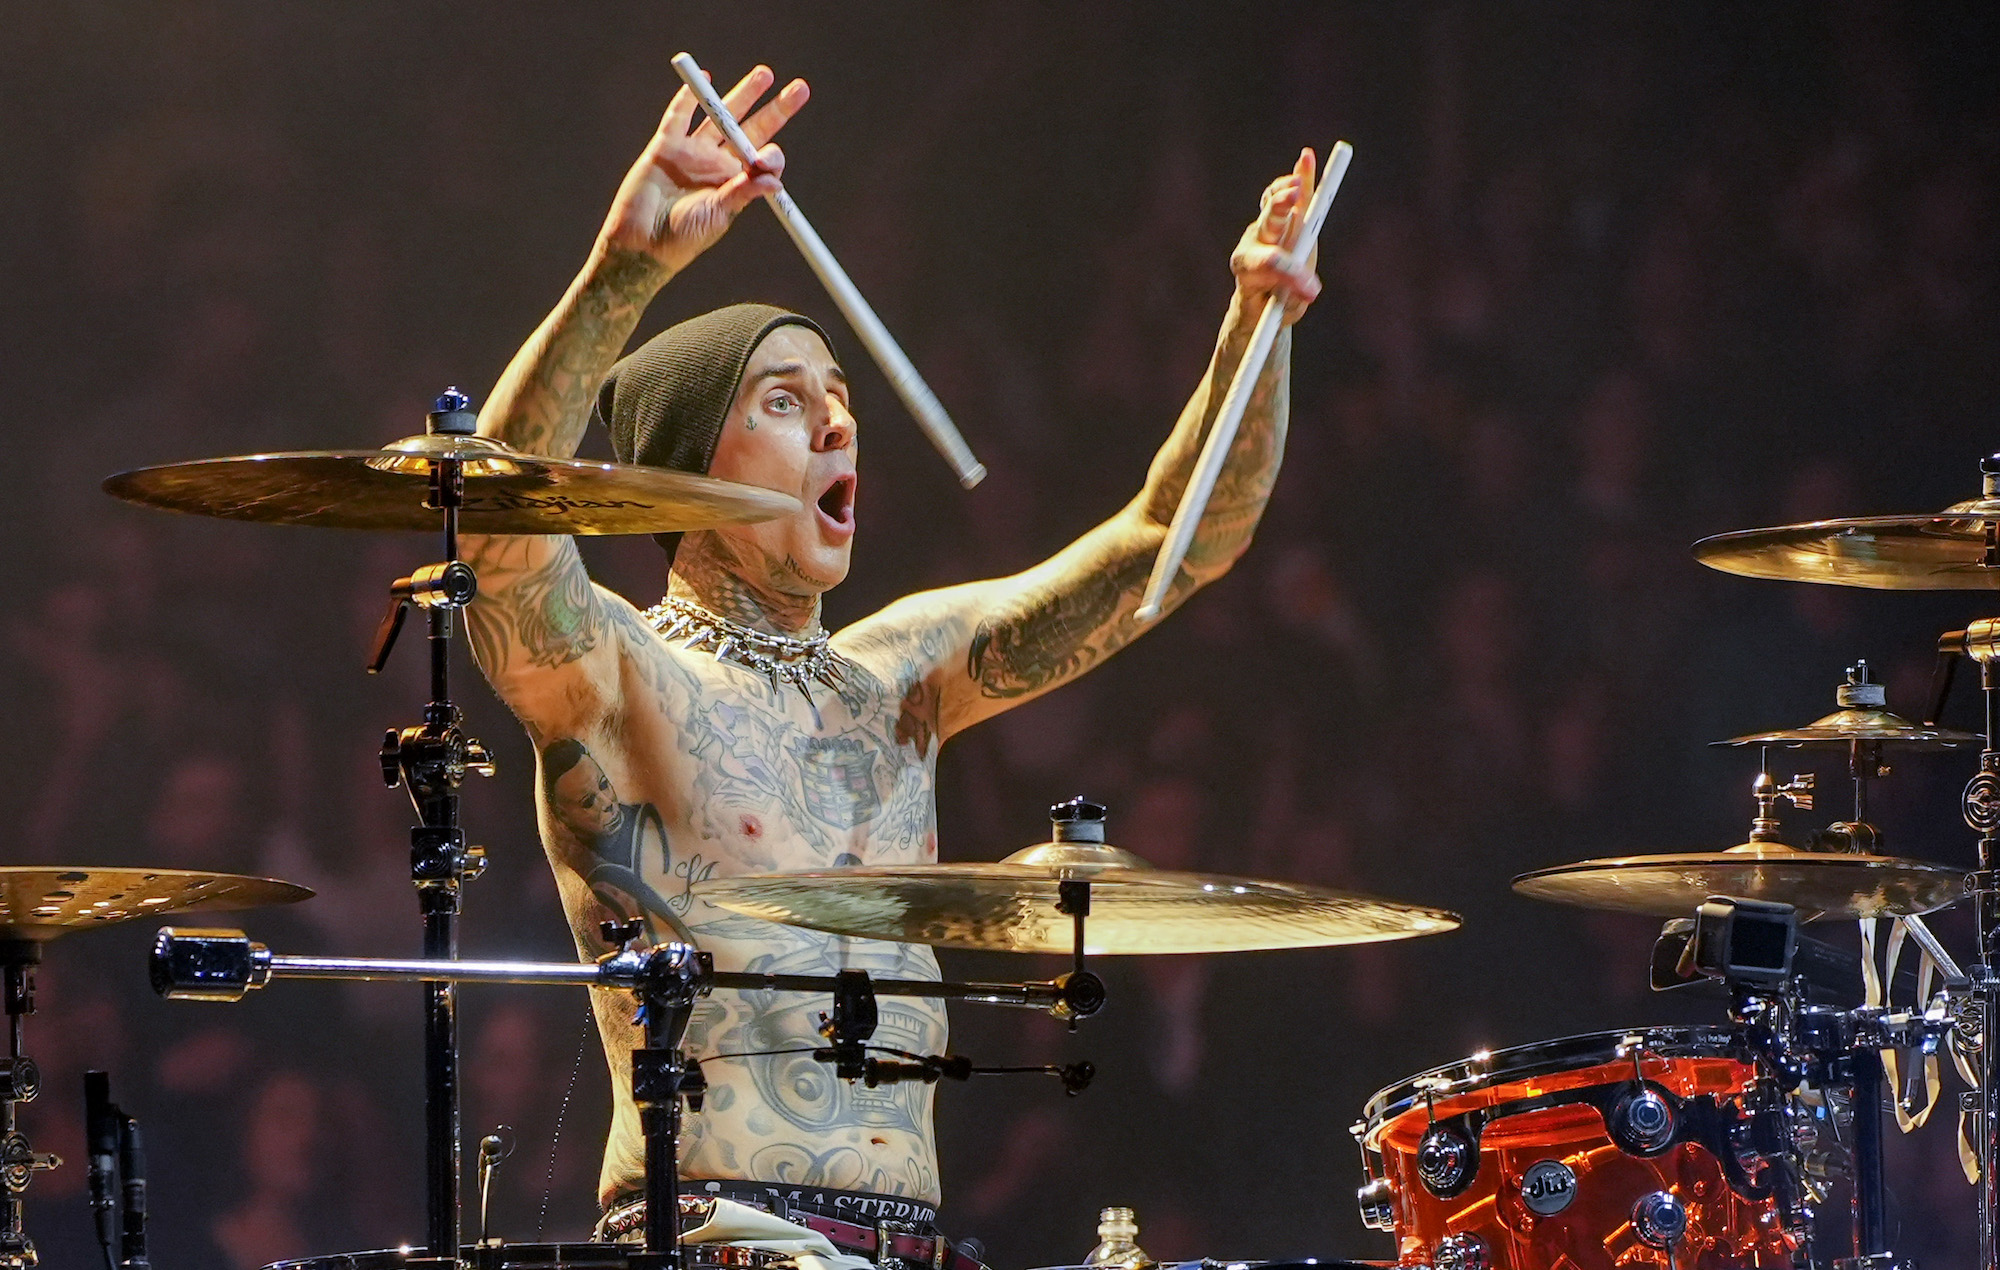 Travis Barker tests positive for COVID-19 ahead of Blink-182’s Portugal show